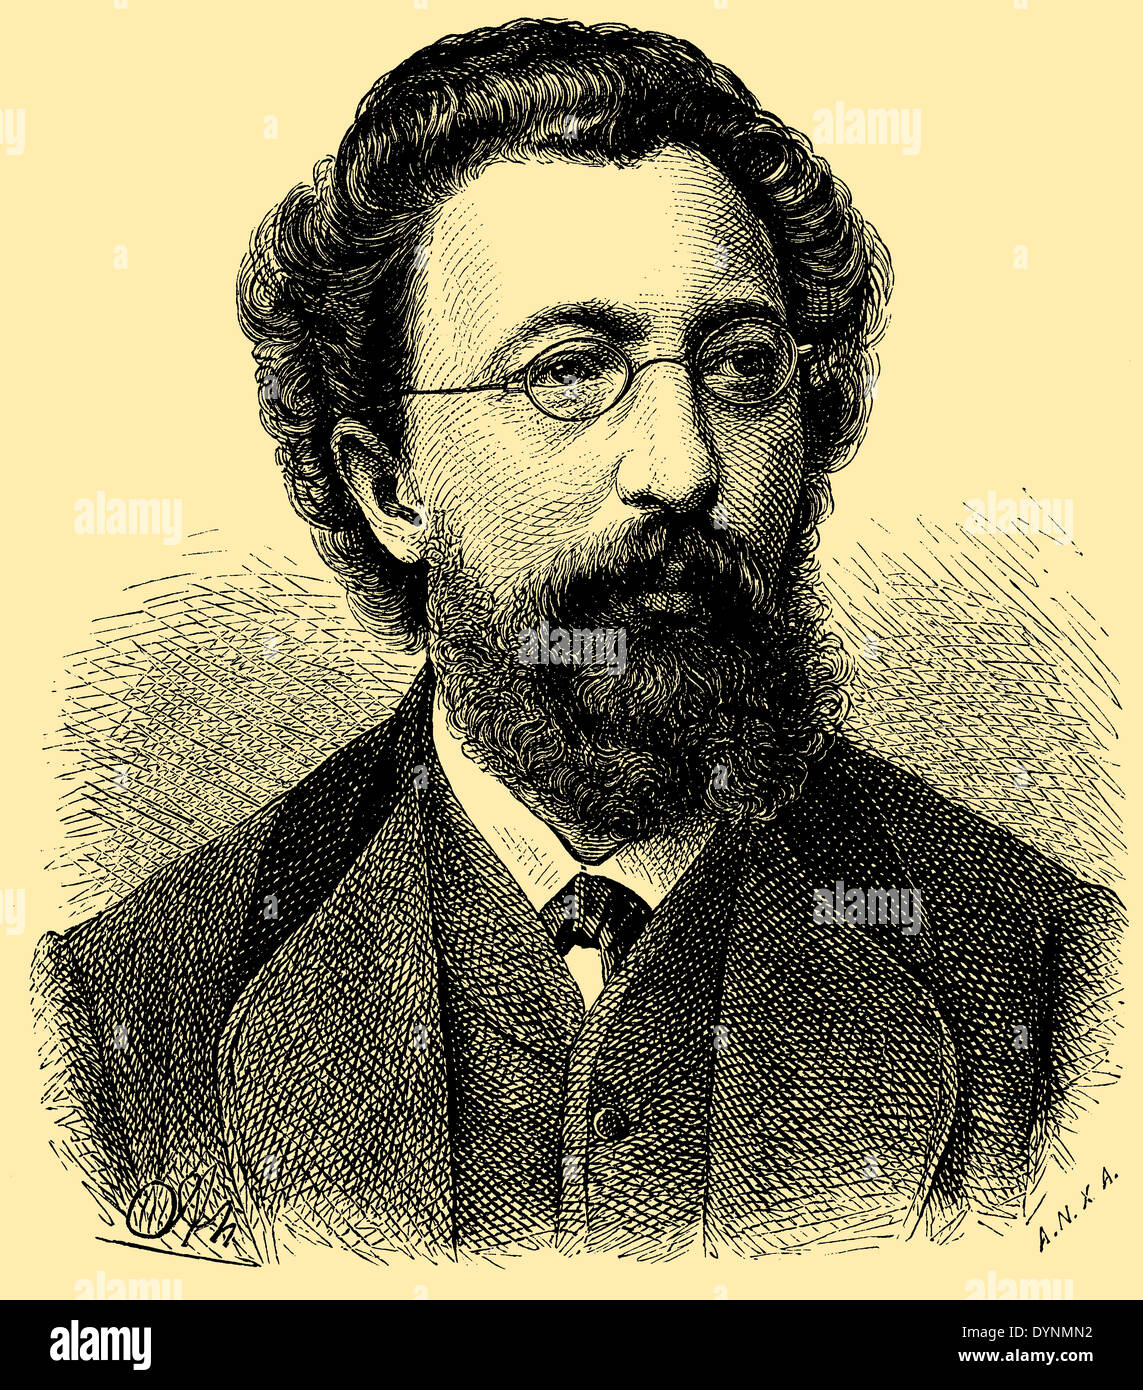 Jean Becker (born May 11, 1833, died October 10, 1884) Stock Photo